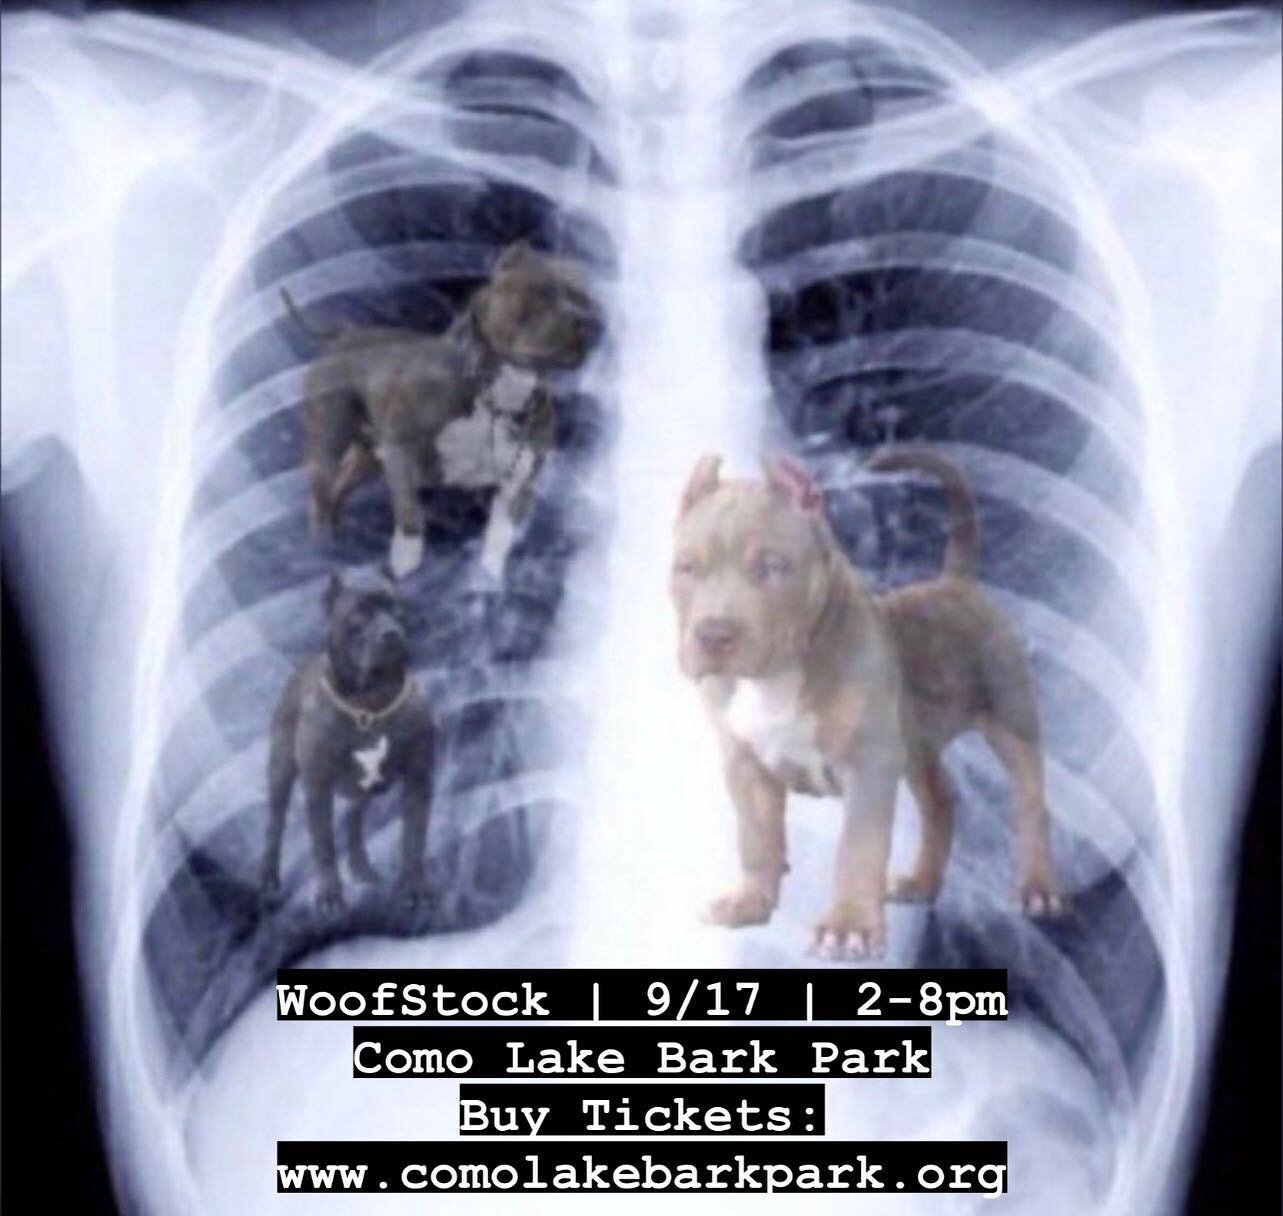 Just got our X rays back&hellip; turns out we got that dawg in us. | See everyone at WoofStock. We can&rsquo;t wait. Bring your dawgs and your dogs.

#livemusic #buffalony #stepoutbuffalo #risebflo #coverband